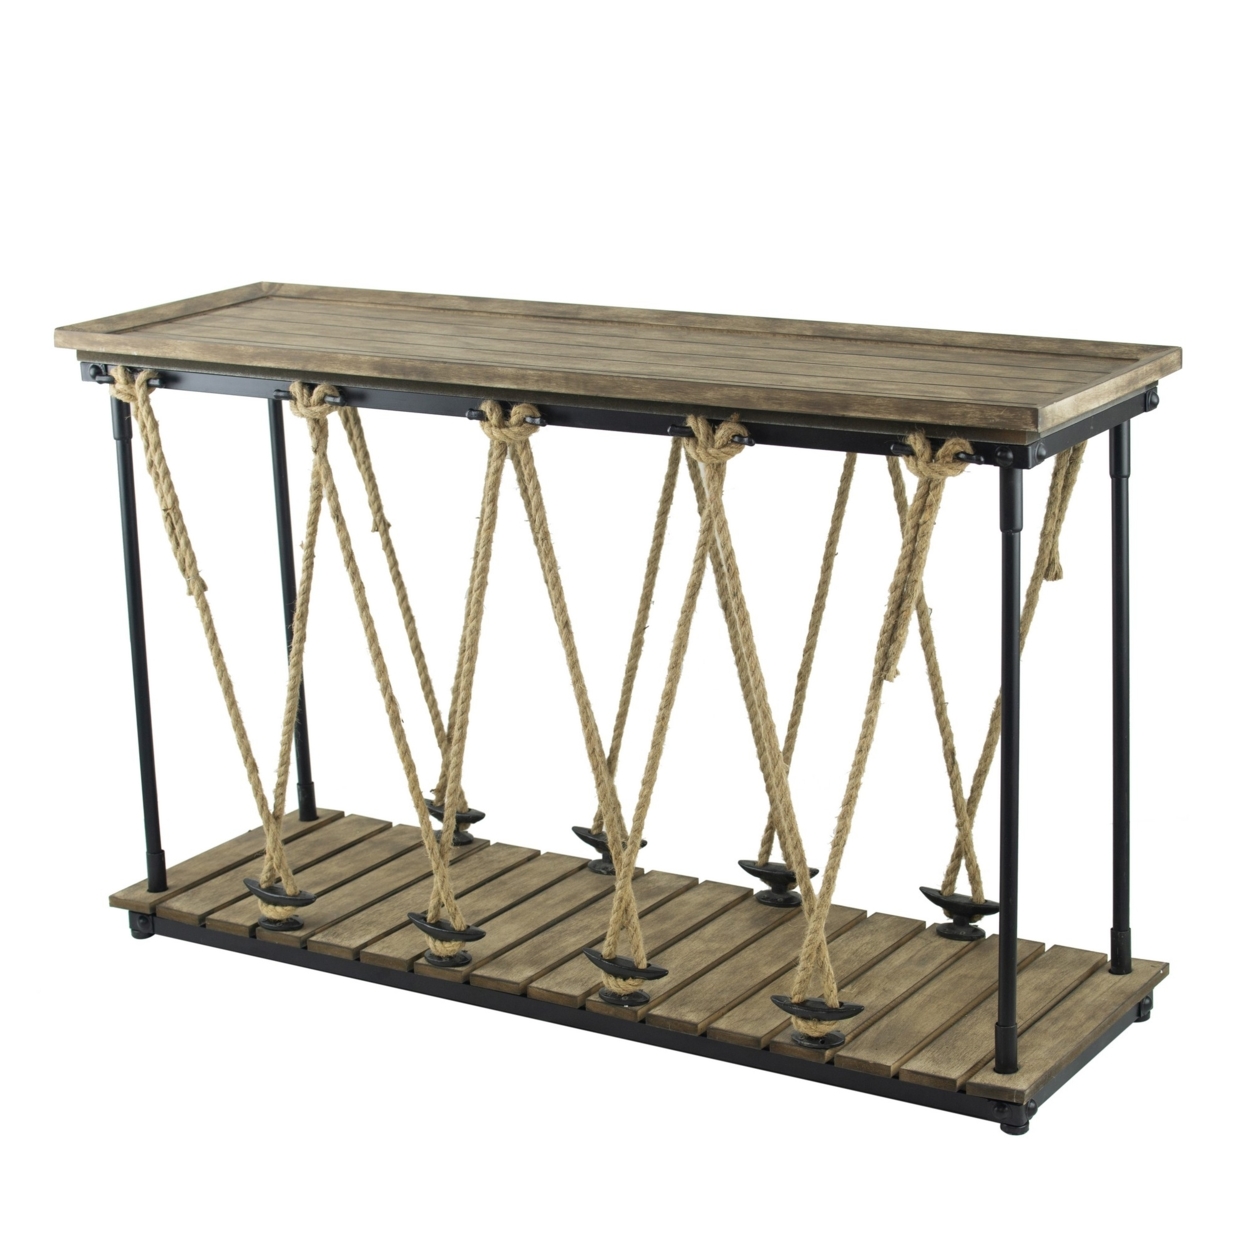 52 Inch Console Table, Rustic Plank Top With Crossed Rope Design, Brown- Saltoro Sherpi